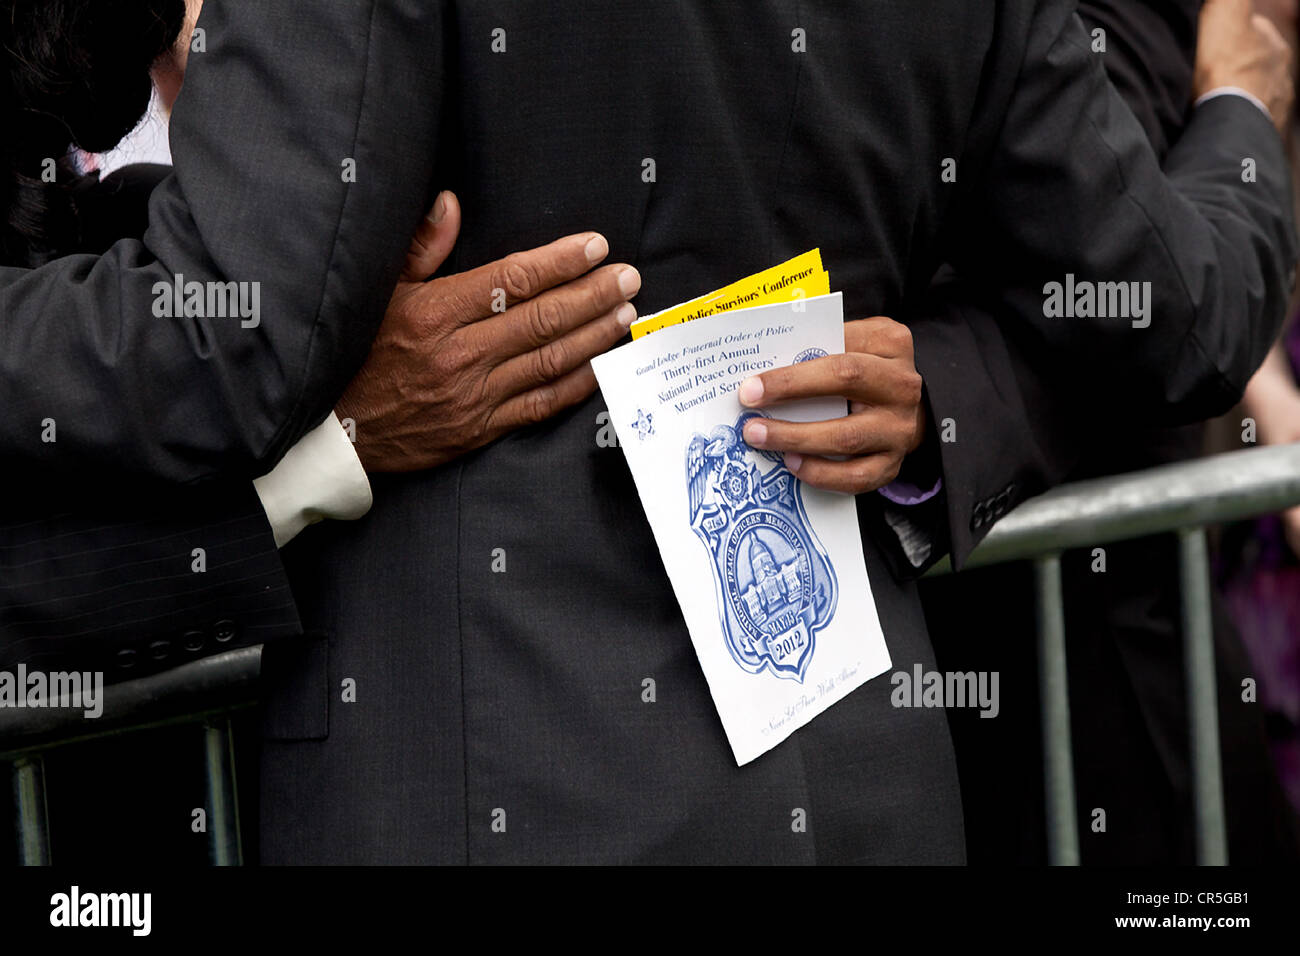 US President Barack Obama greets people in the audience at the National Peace Officers Memorial Service, an annual ceremony honoring law enforcement who were killed in the line of duty at the U.S. Capitol May 15, 201 in Washington, DC. Stock Photo